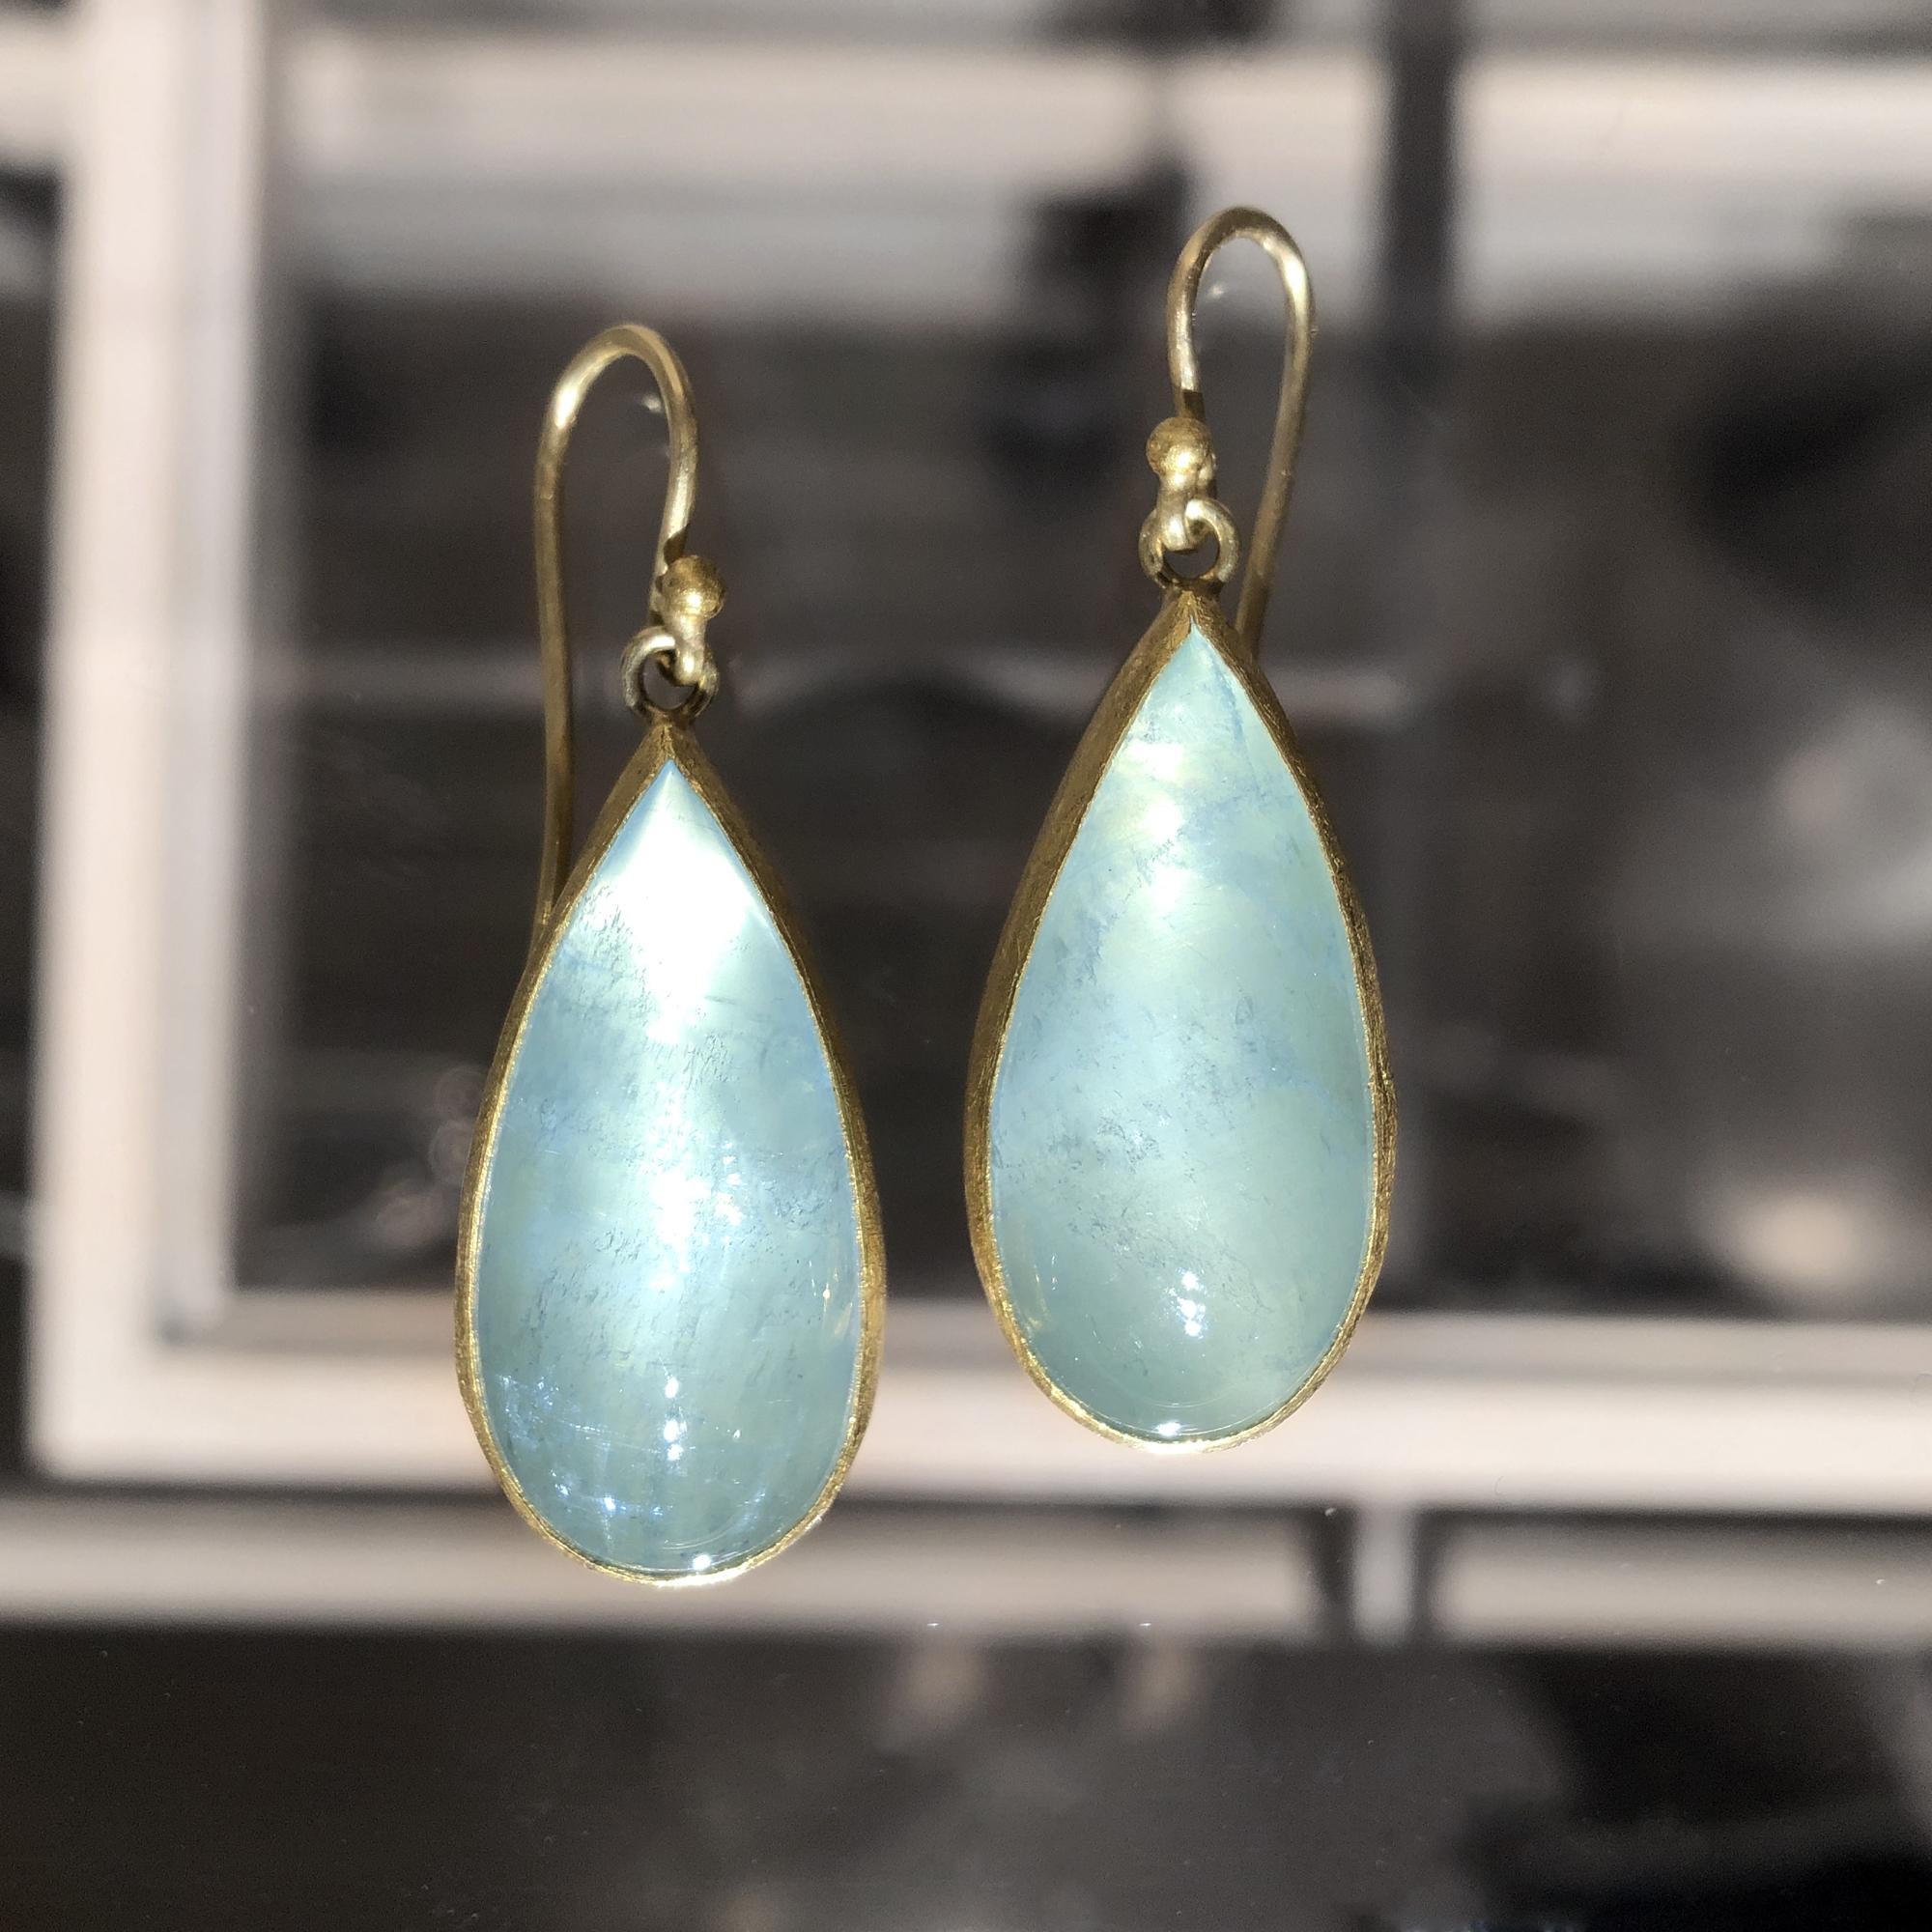 One of a Kind Gold Dangle Earrings handcrafted by acclaimed maker Petra Class featuring a phenomenal matched pair of glowing pear-shaped, cabochon-cut aquamarines, bezel-set in the artist's signature-finished 22k yellow gold and linked to 18k yellow